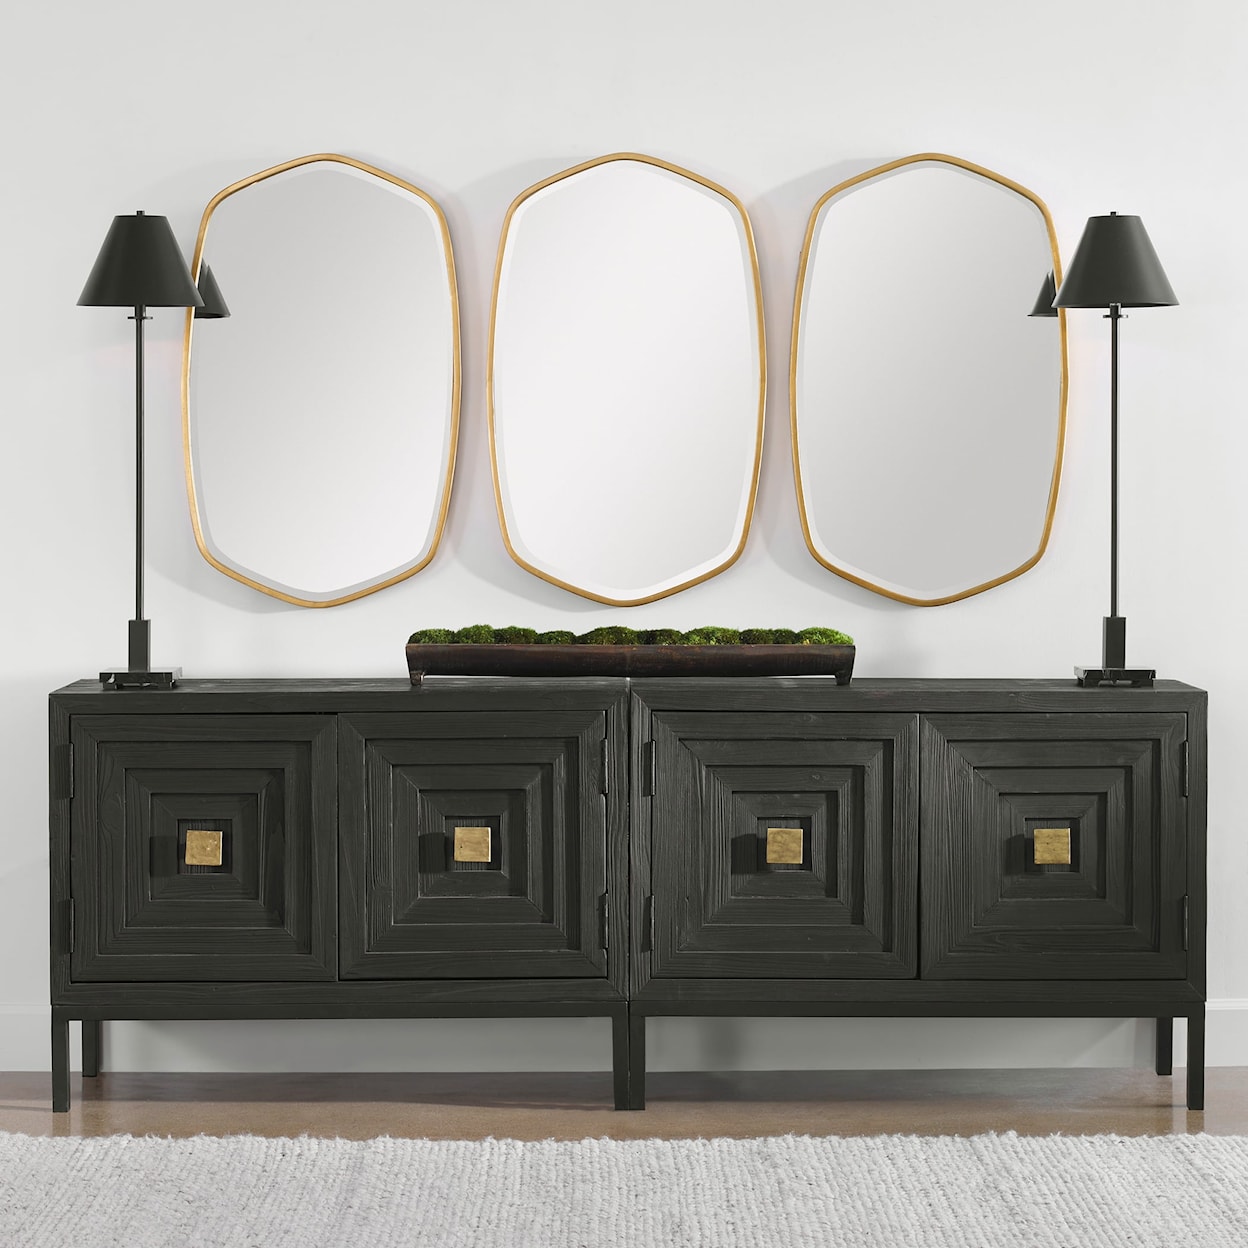 Uttermost Mirrors - Oval Duronia Antiqued Gold Mirror